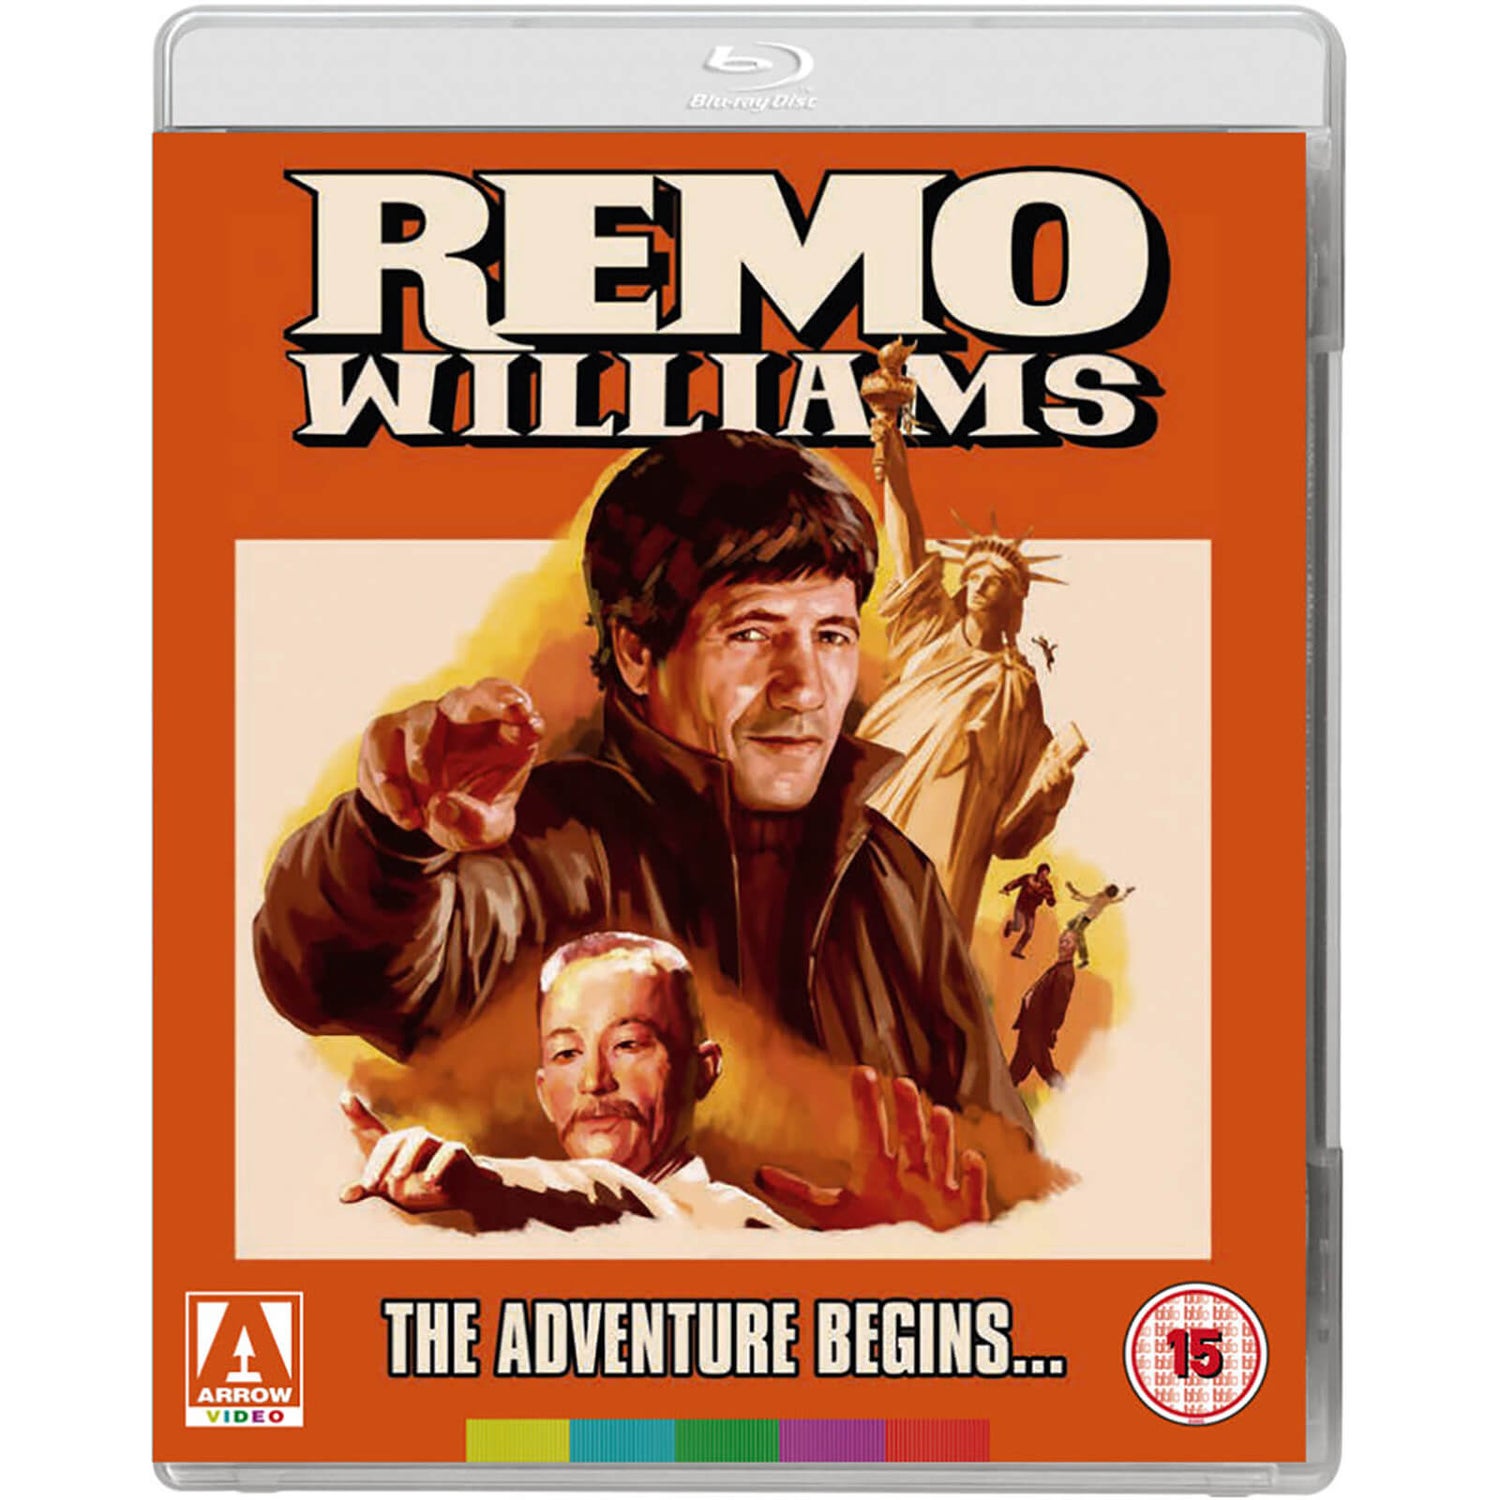 Remo Williams: The Adventure Begins Blu-ray